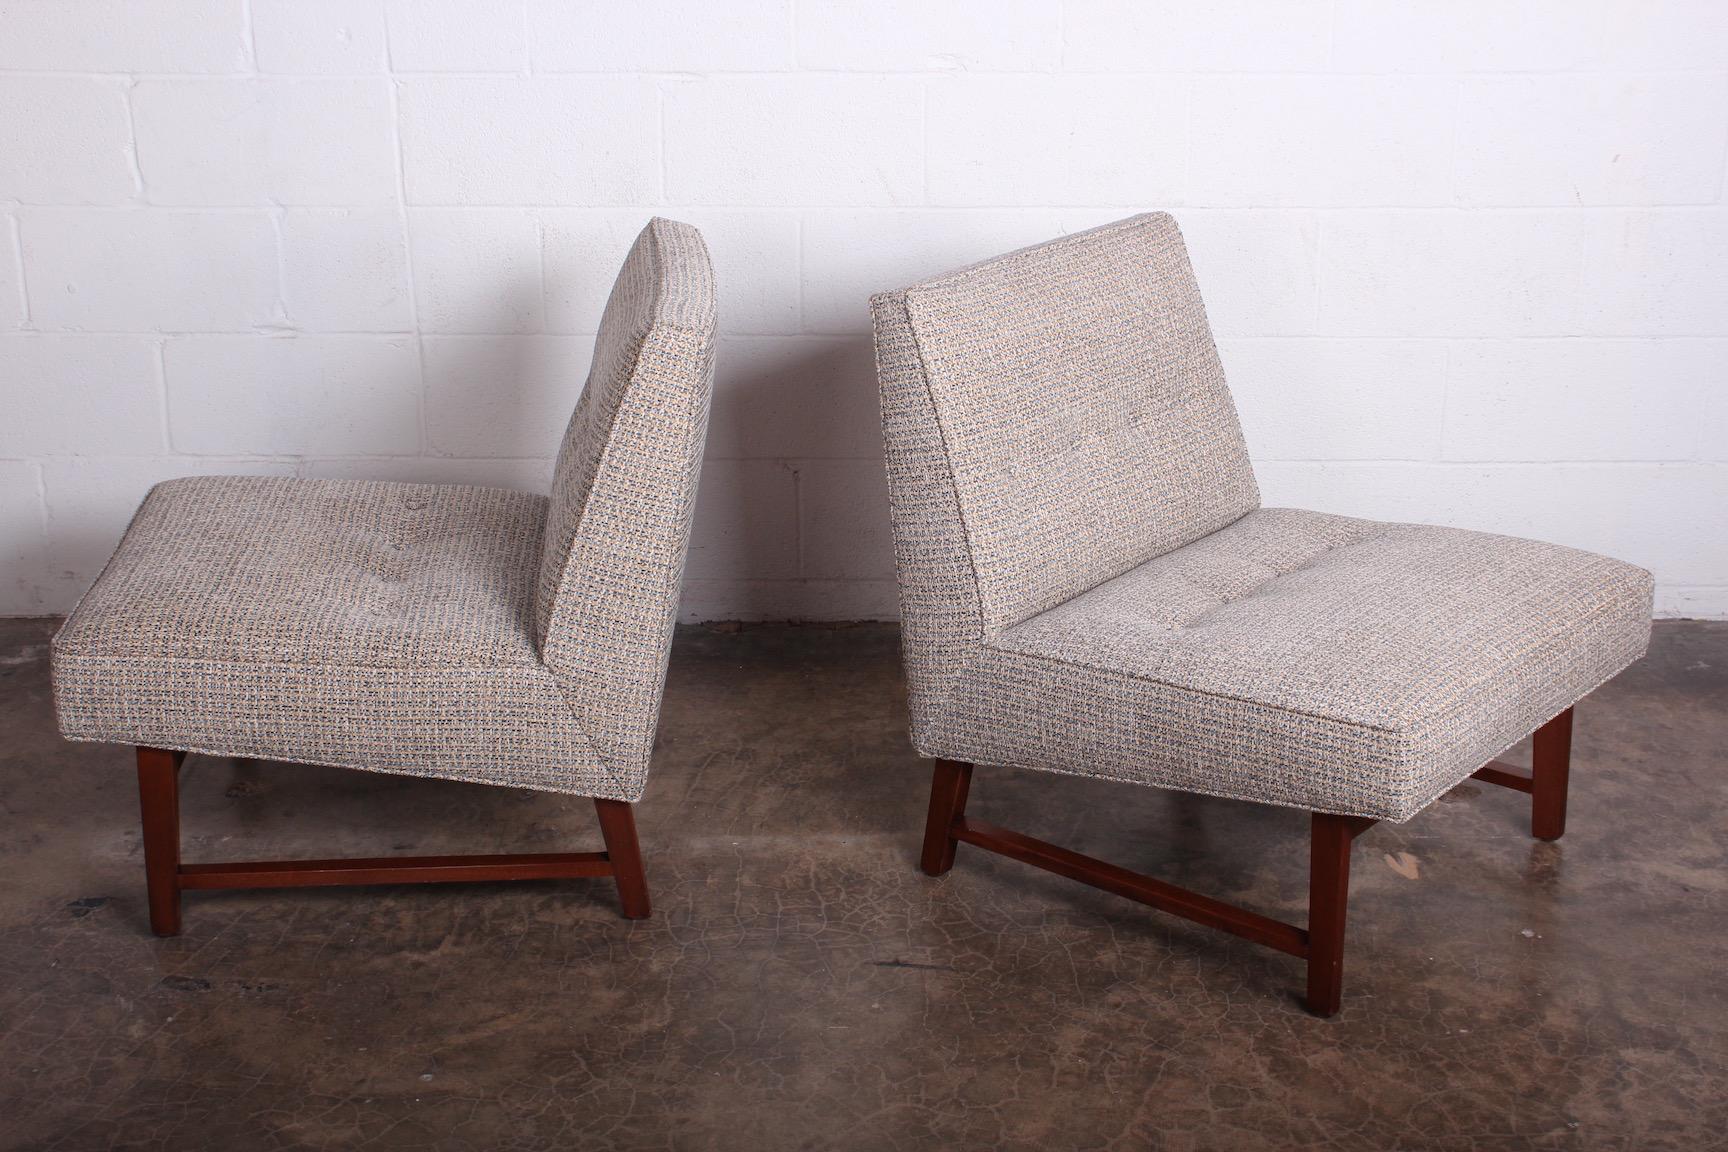 Pair of Slipper Chairs by Edward Wormley for Dunbar In Good Condition For Sale In Dallas, TX